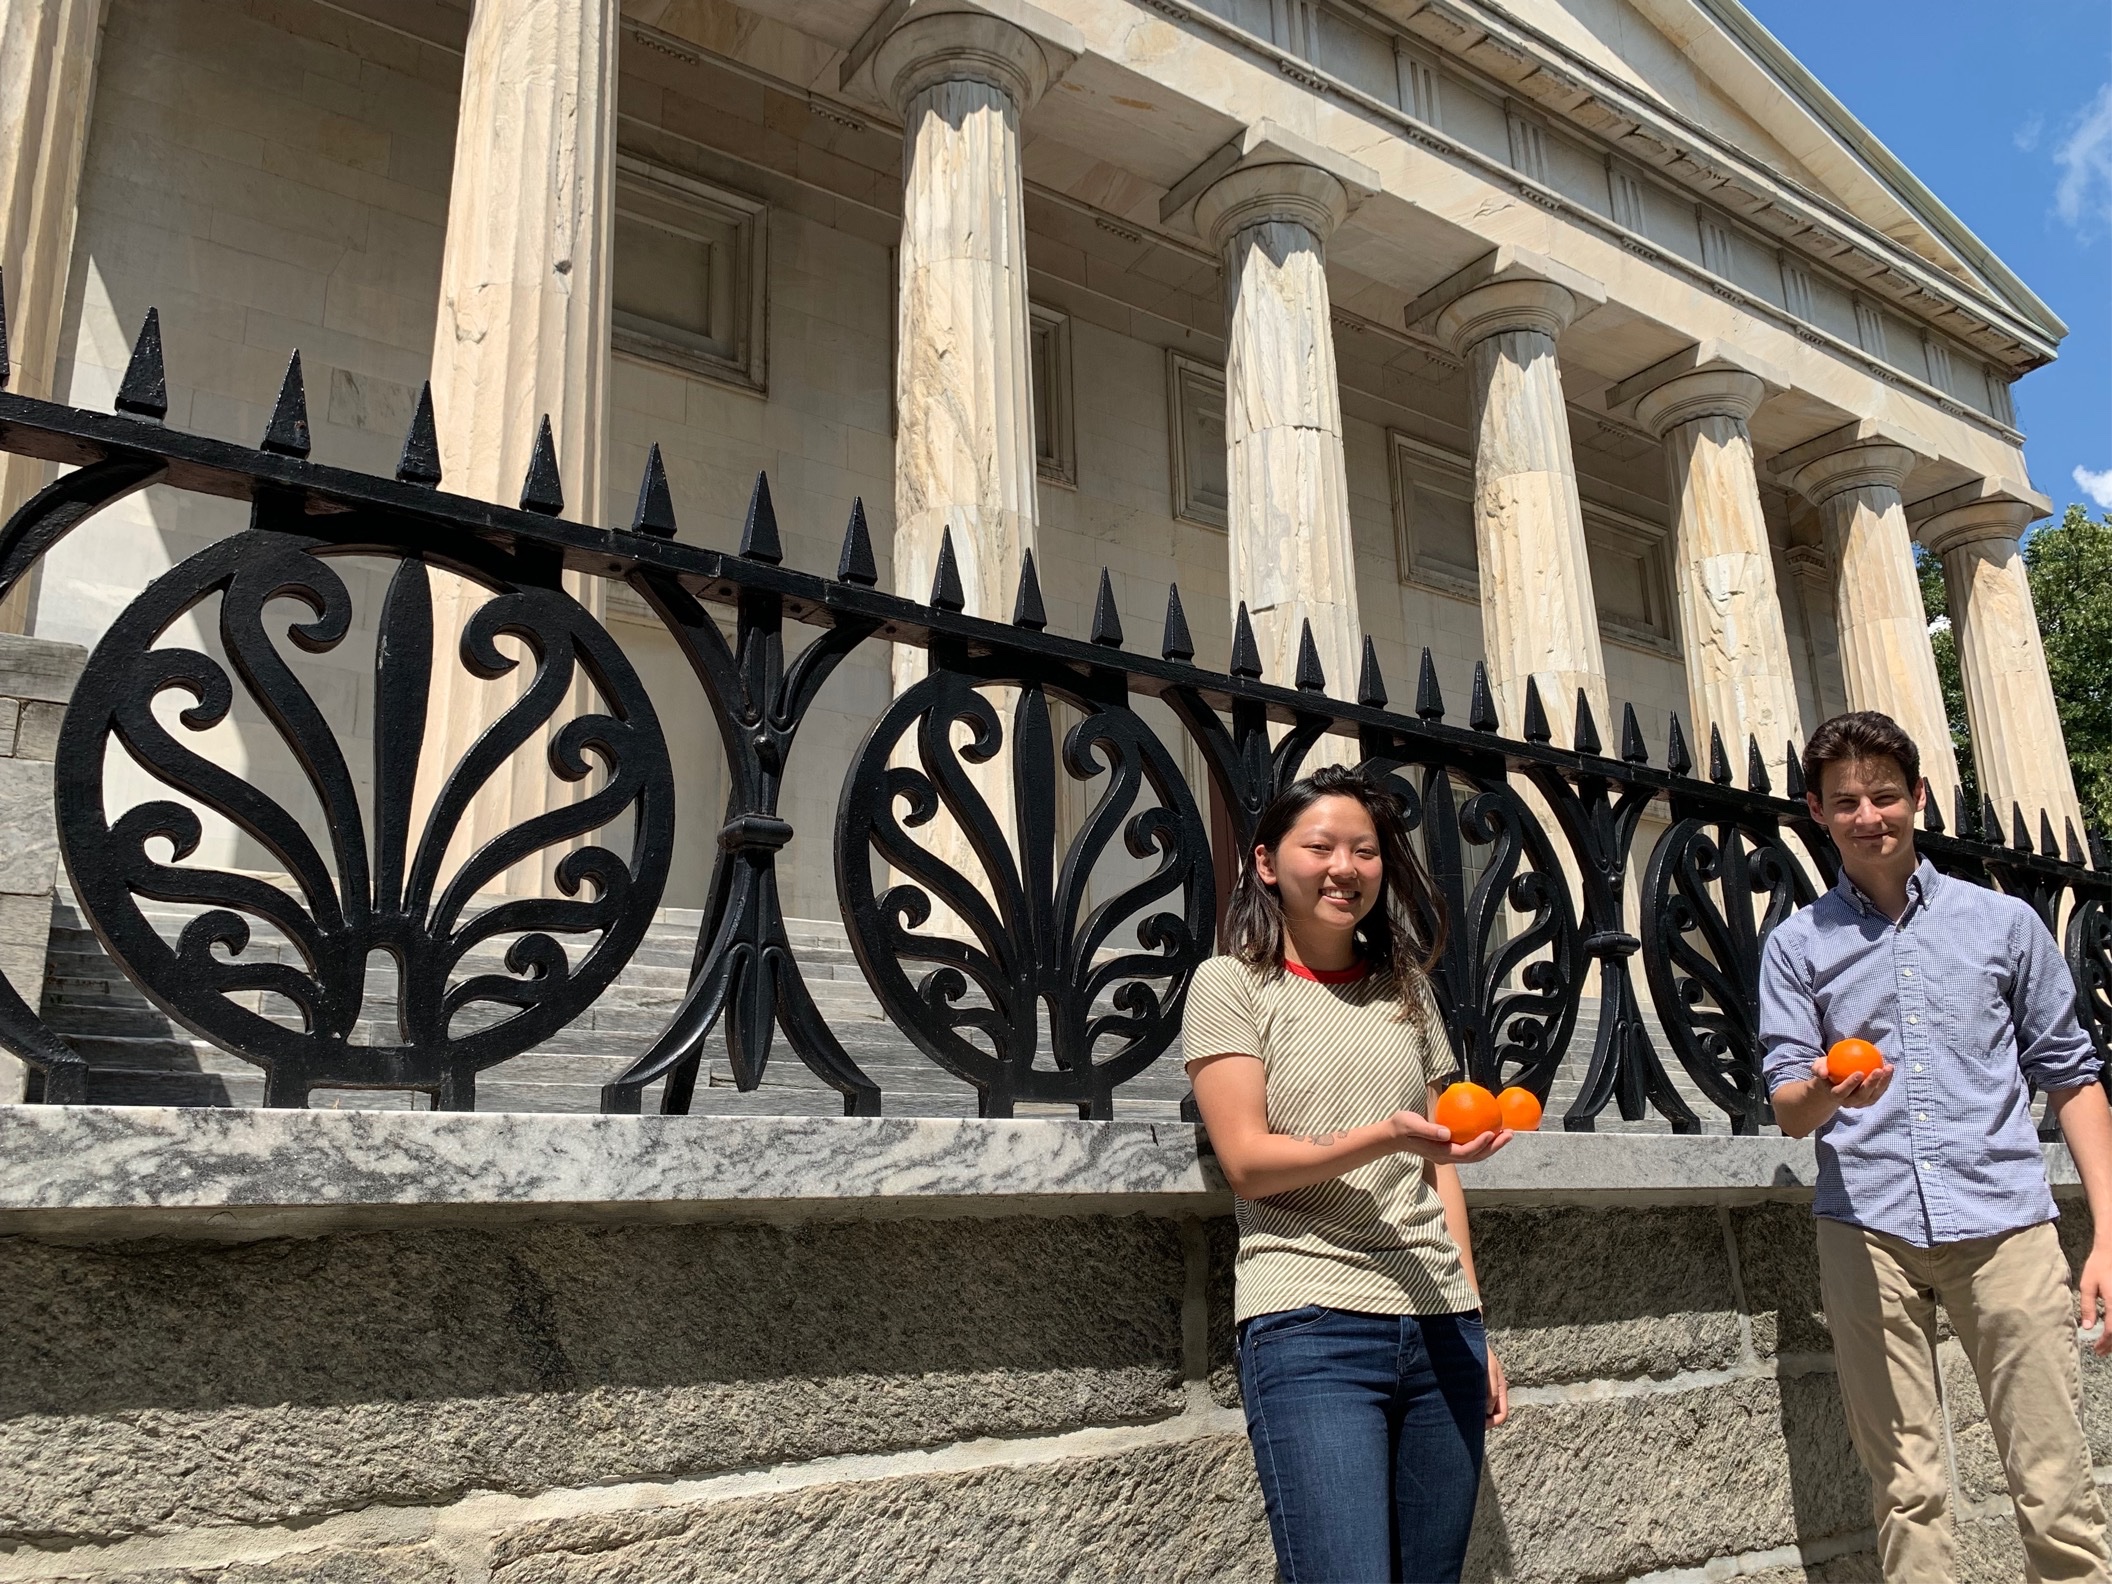 Two students holding oranges standing in front of historic building with stone columns.